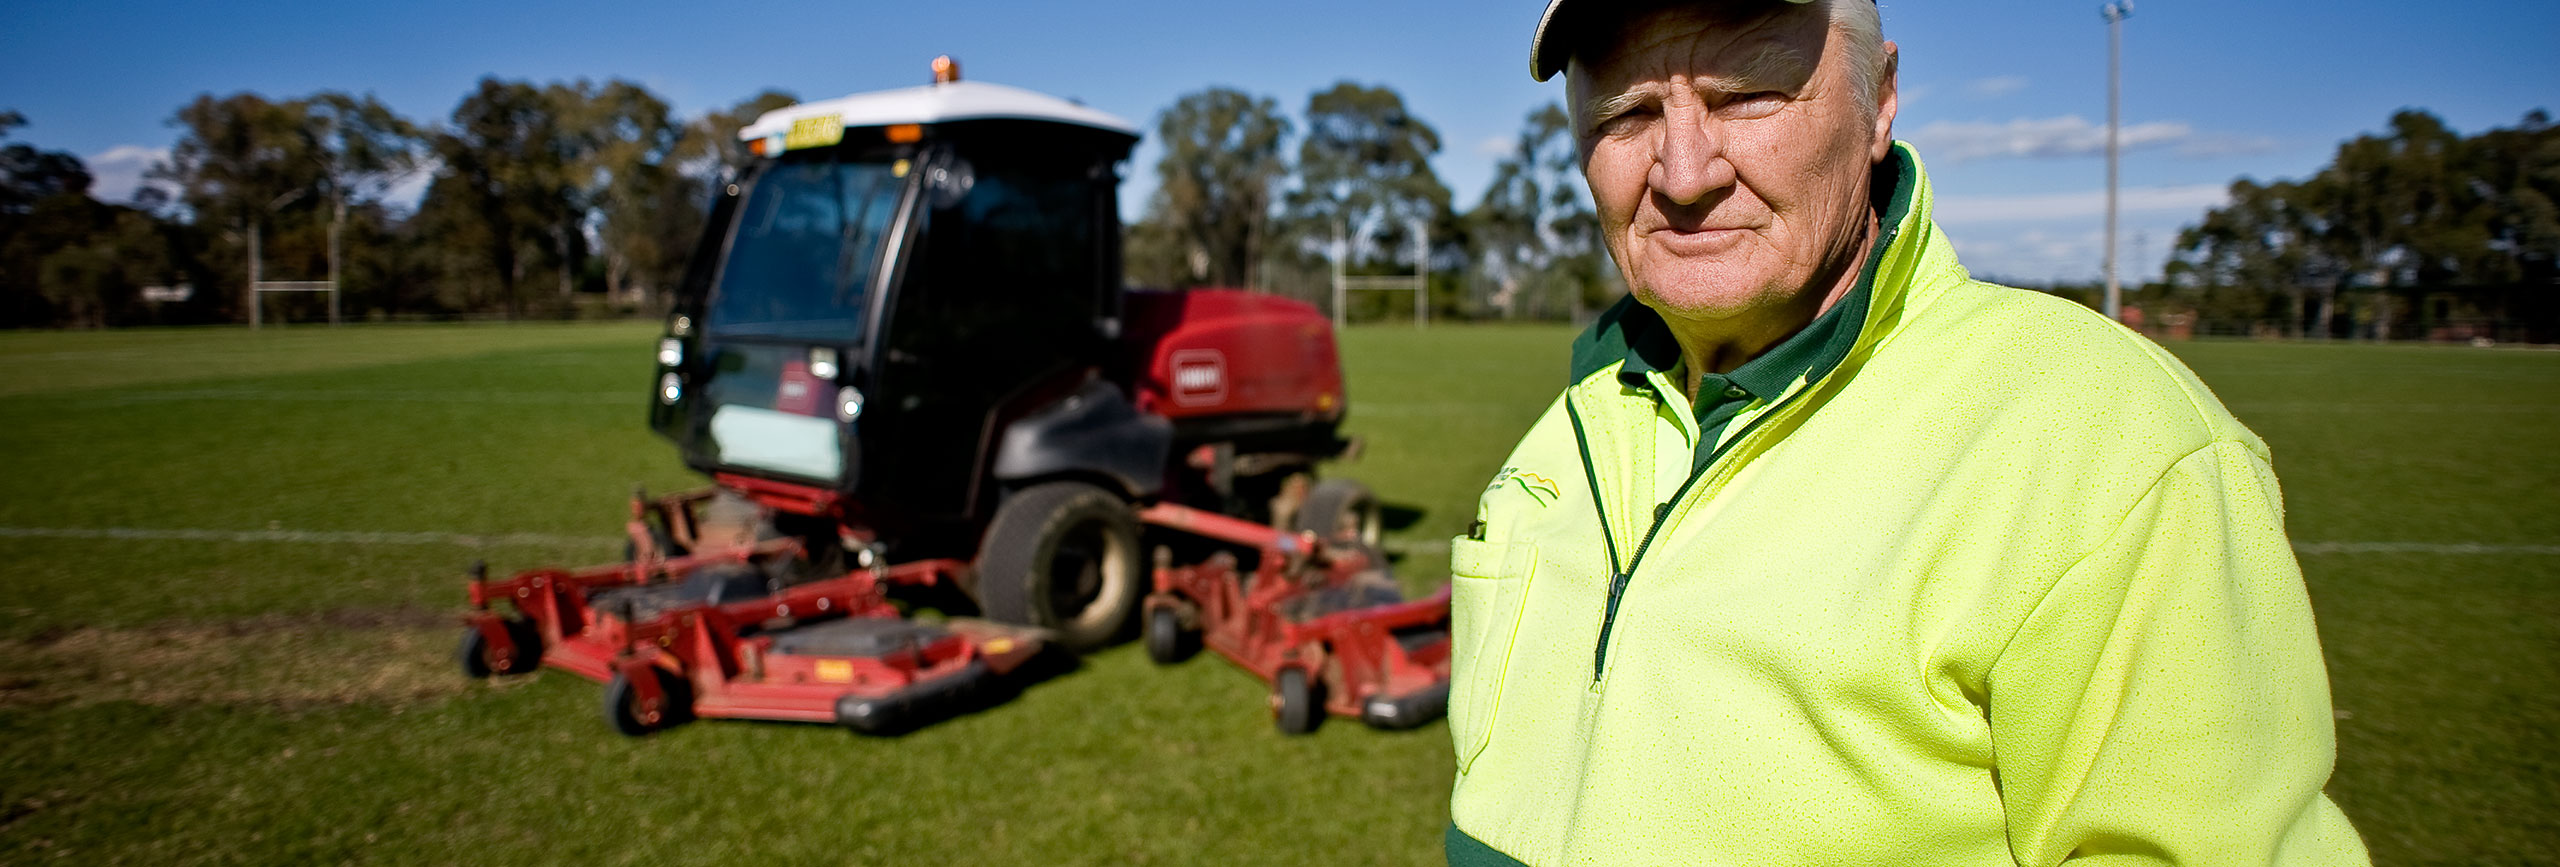 Council officer standing in front of a tractor in a park